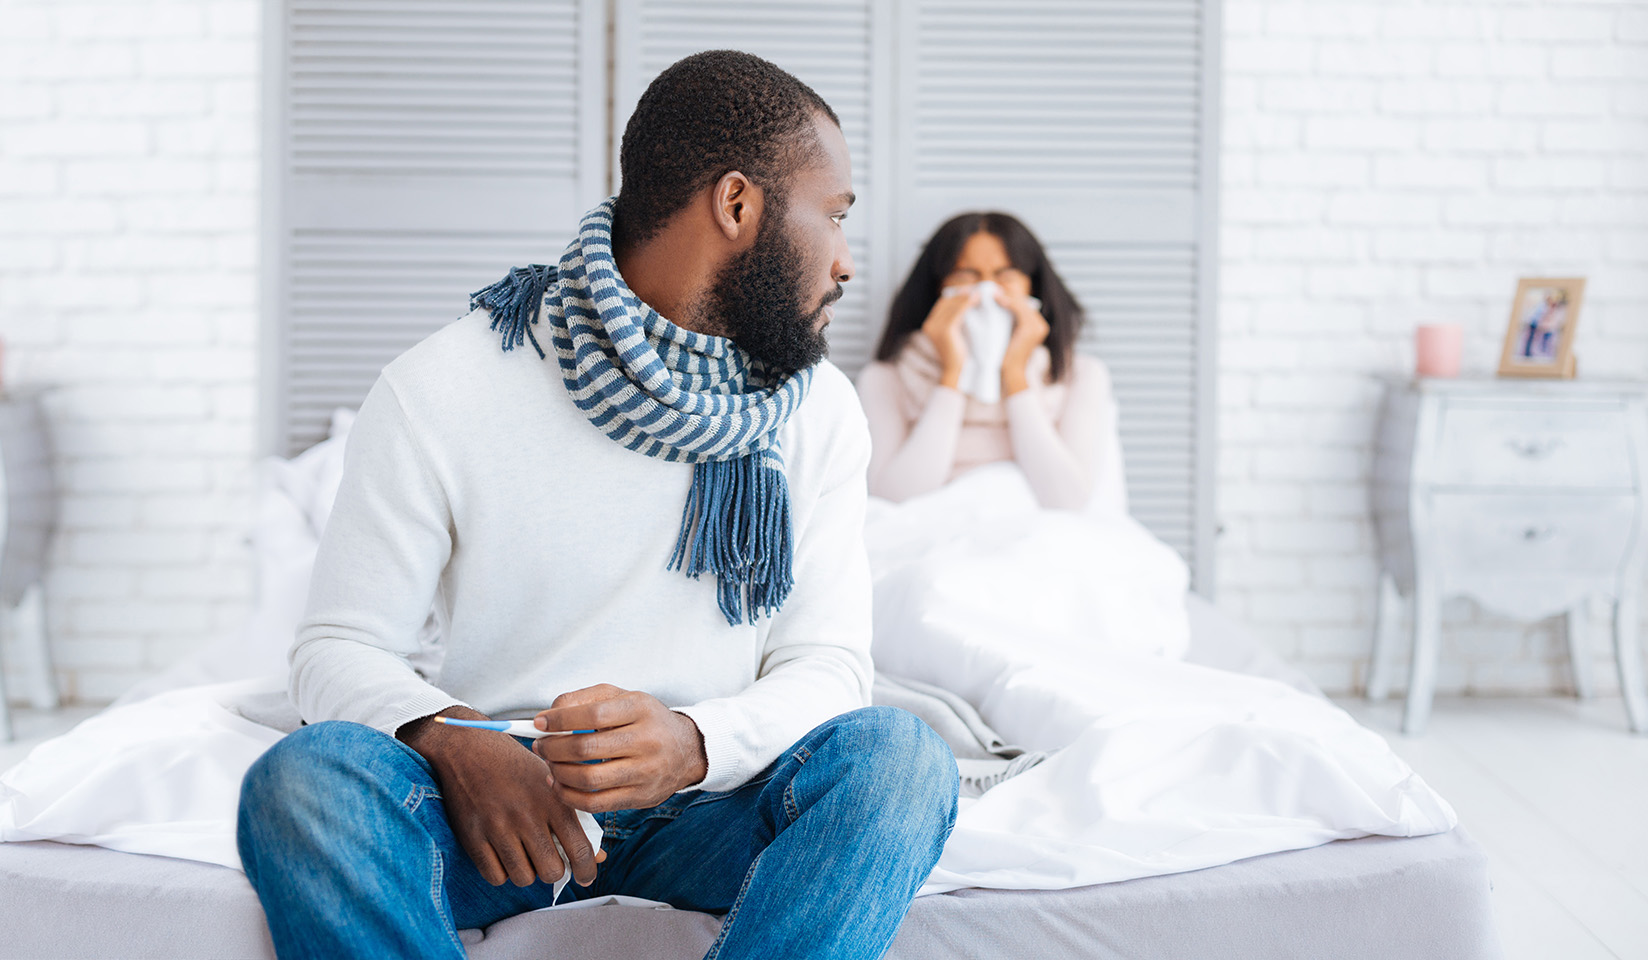 A black man sits on the foot of a bed in the foreground turning around to look at a woman sitting behind him under the blanket blowing her nose into a tissue indicating she is sick